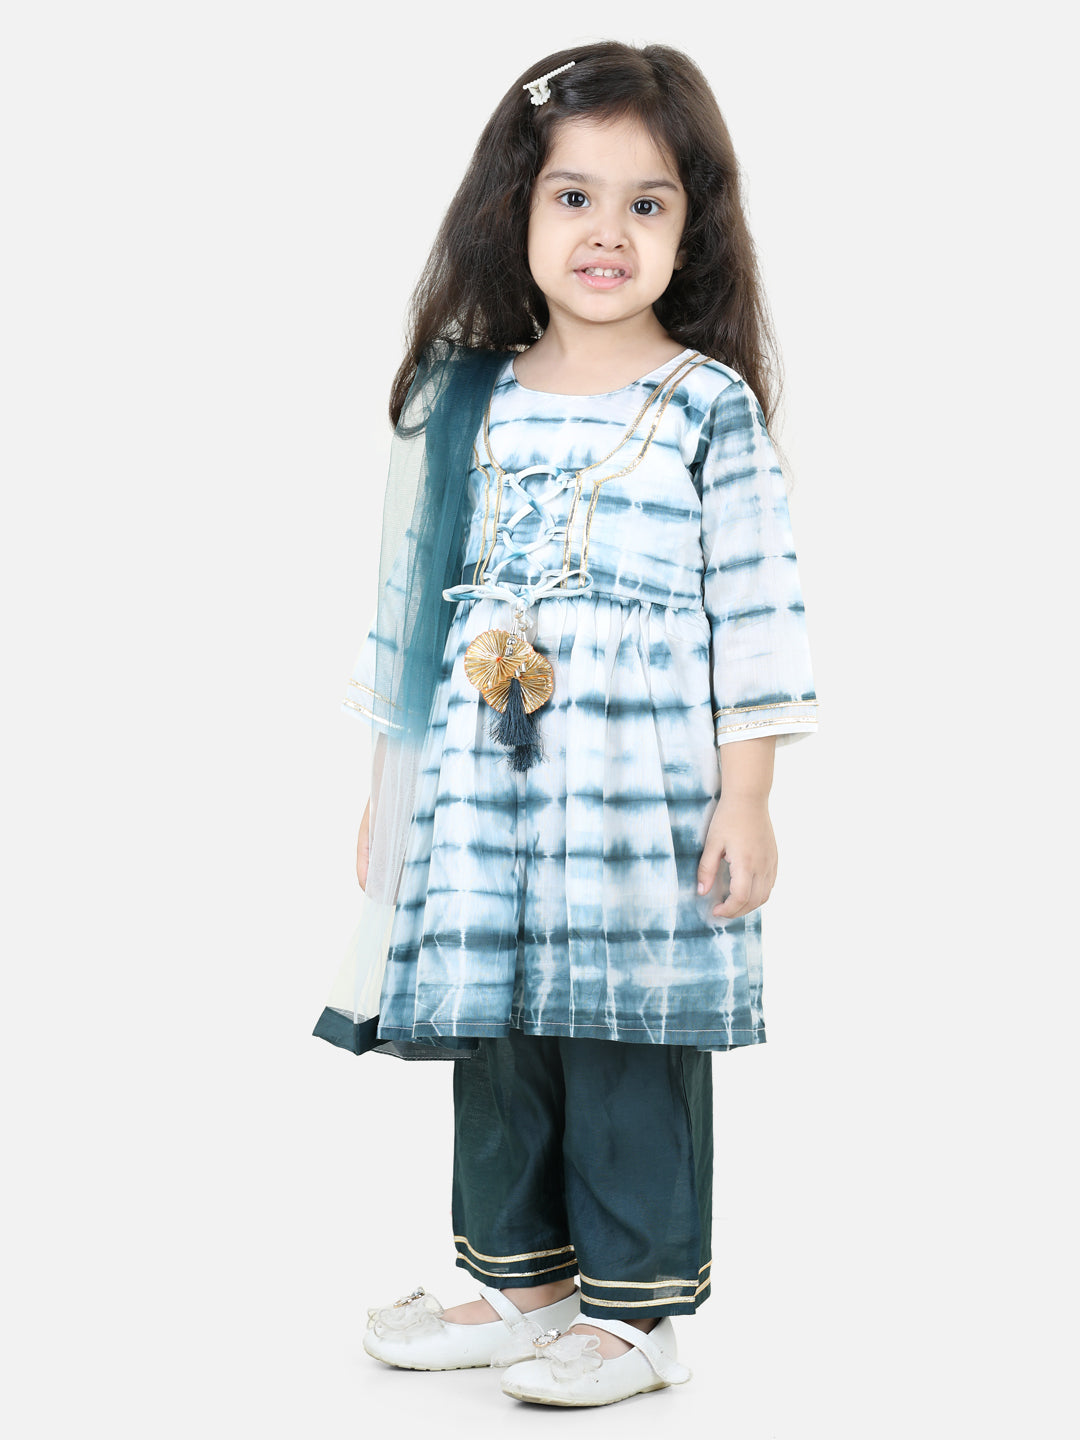 BownBee Hand Dyed Chanderi Silk Kurti Pant with Dupatta for Girls- Blue